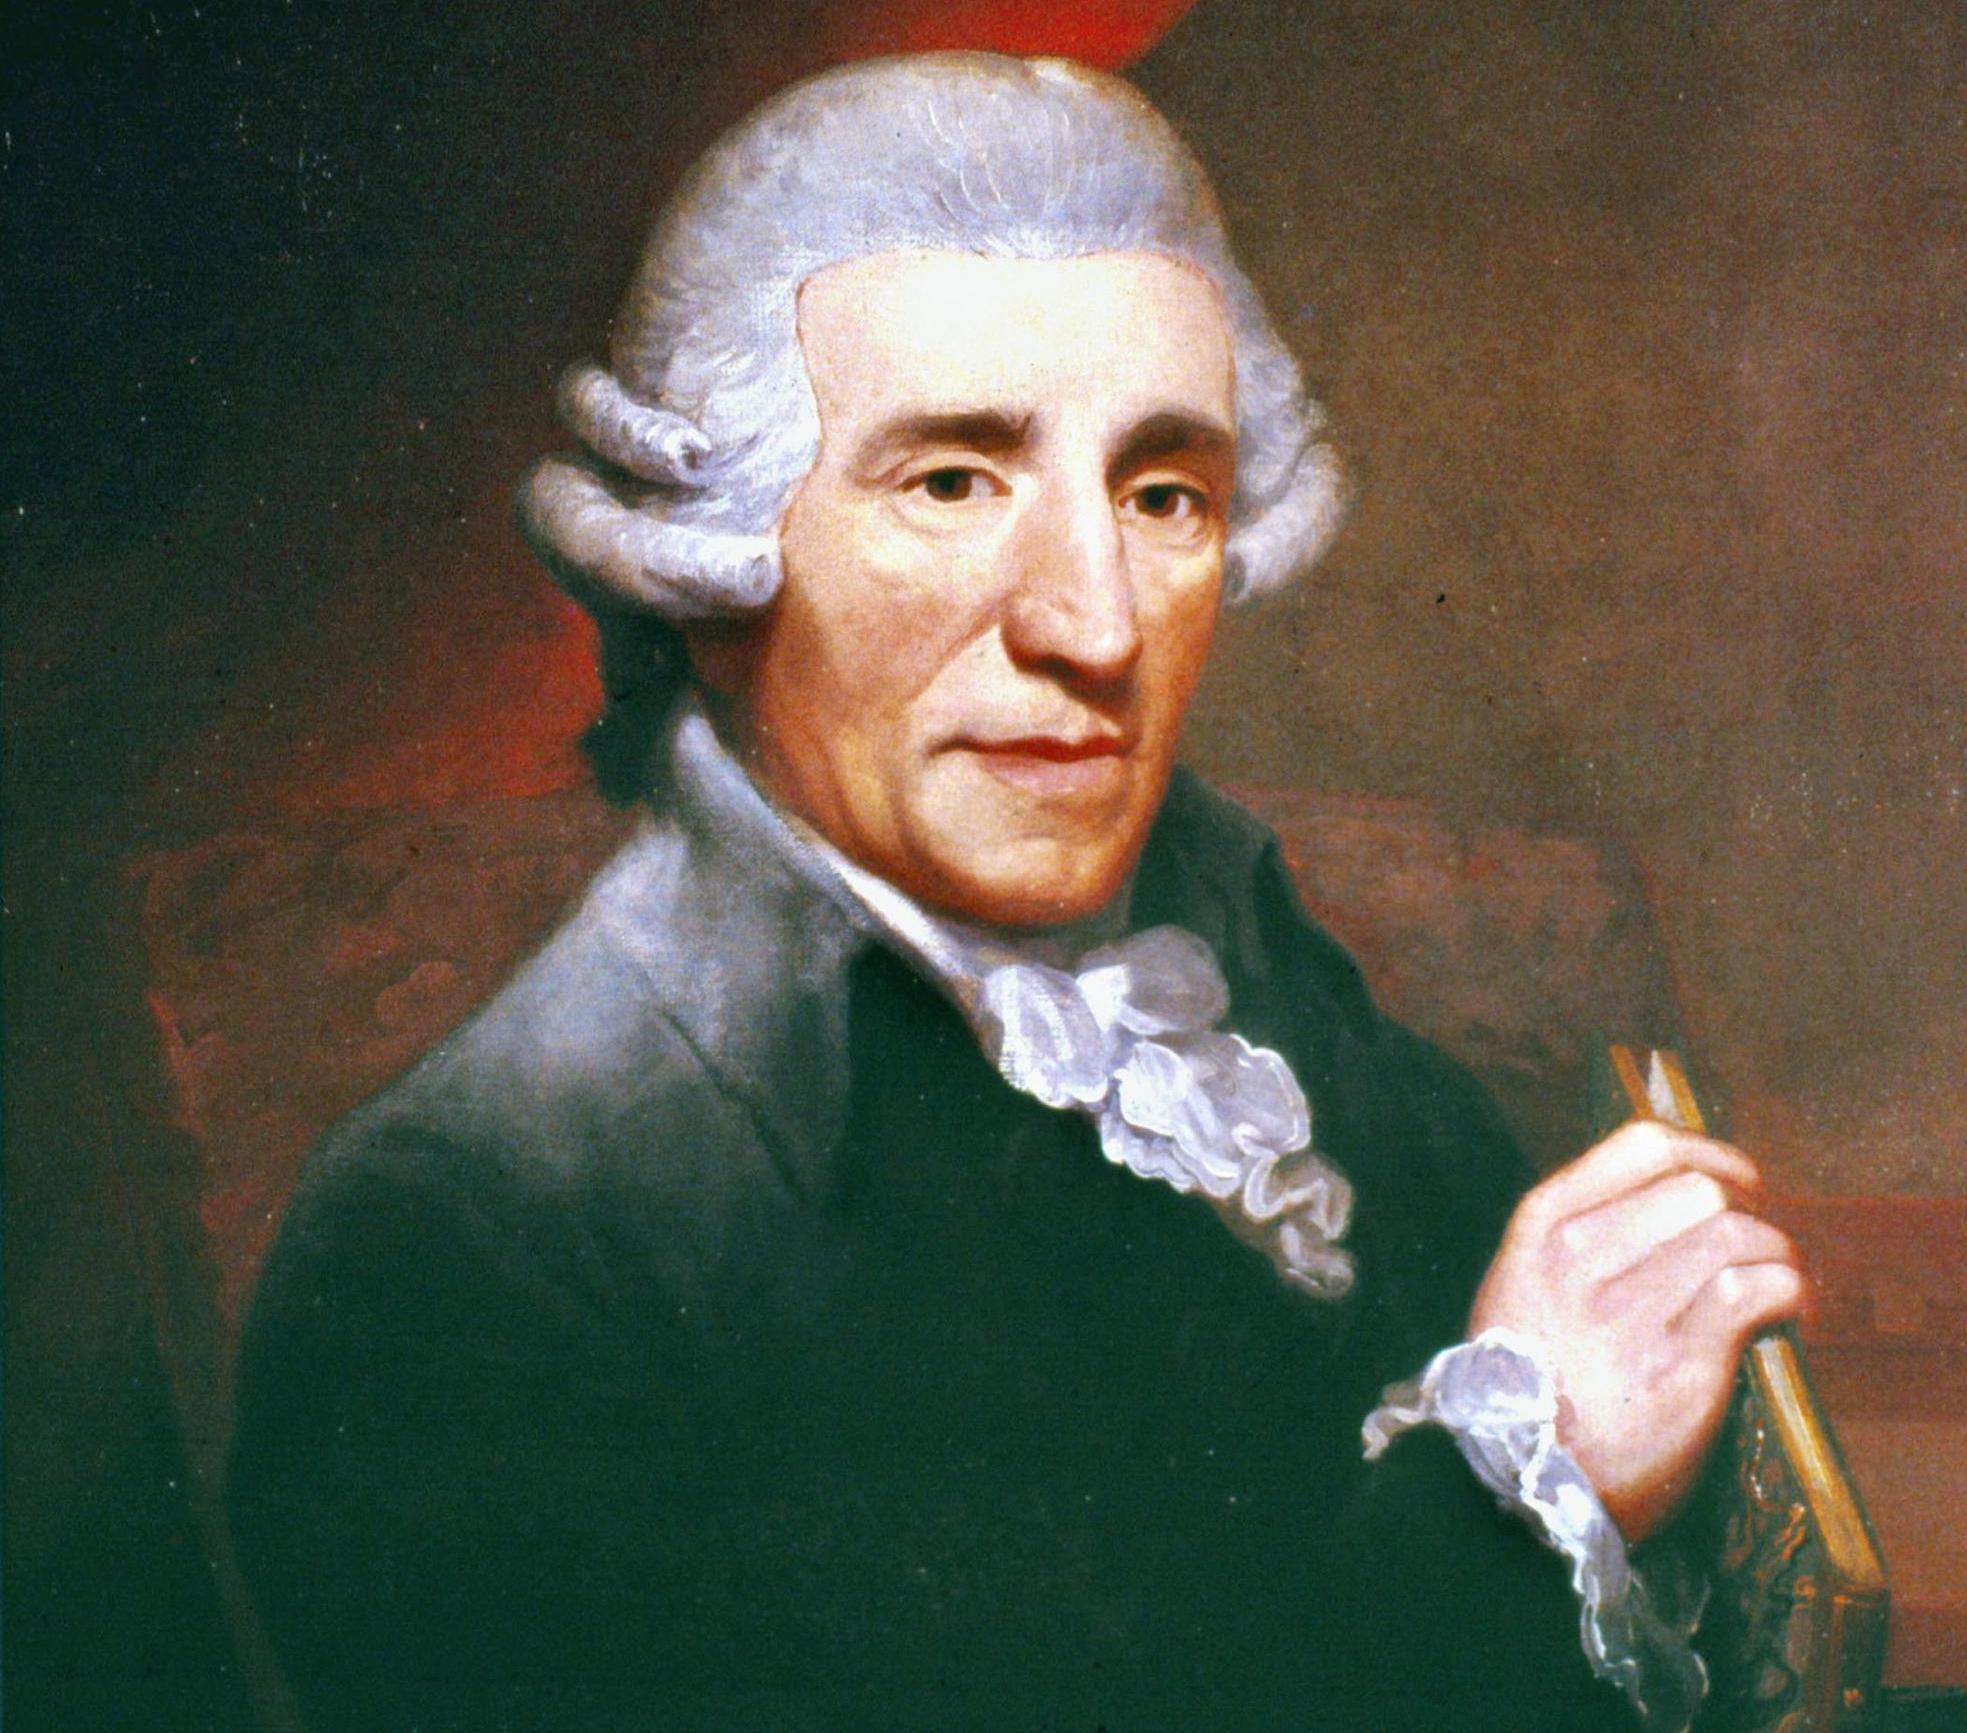 Haydn’s prolific creativity resulted in an extraordinary succession of masterpieces